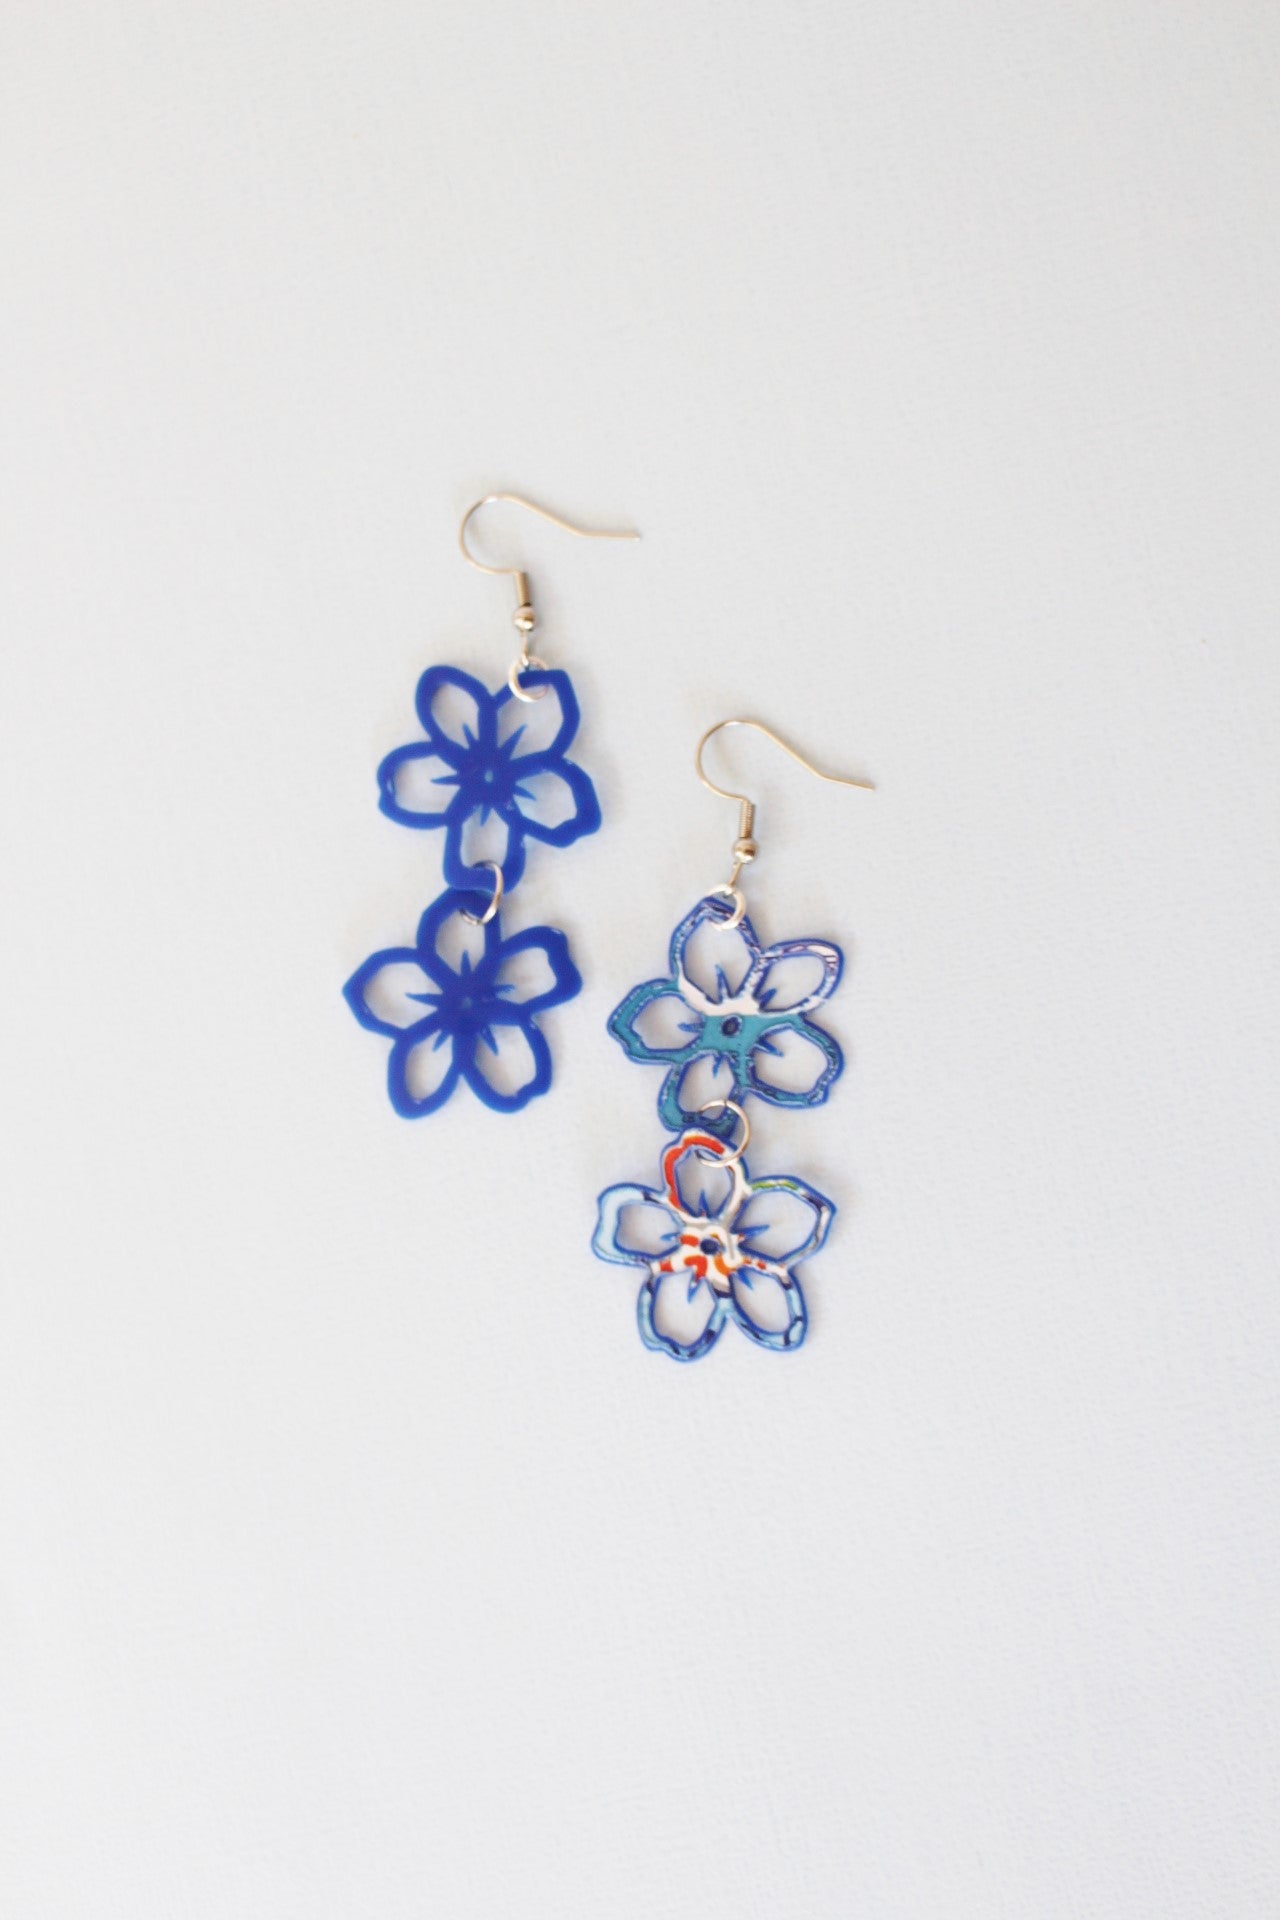 Something Extra Upcycled Earrings – Grace At Home Treasures